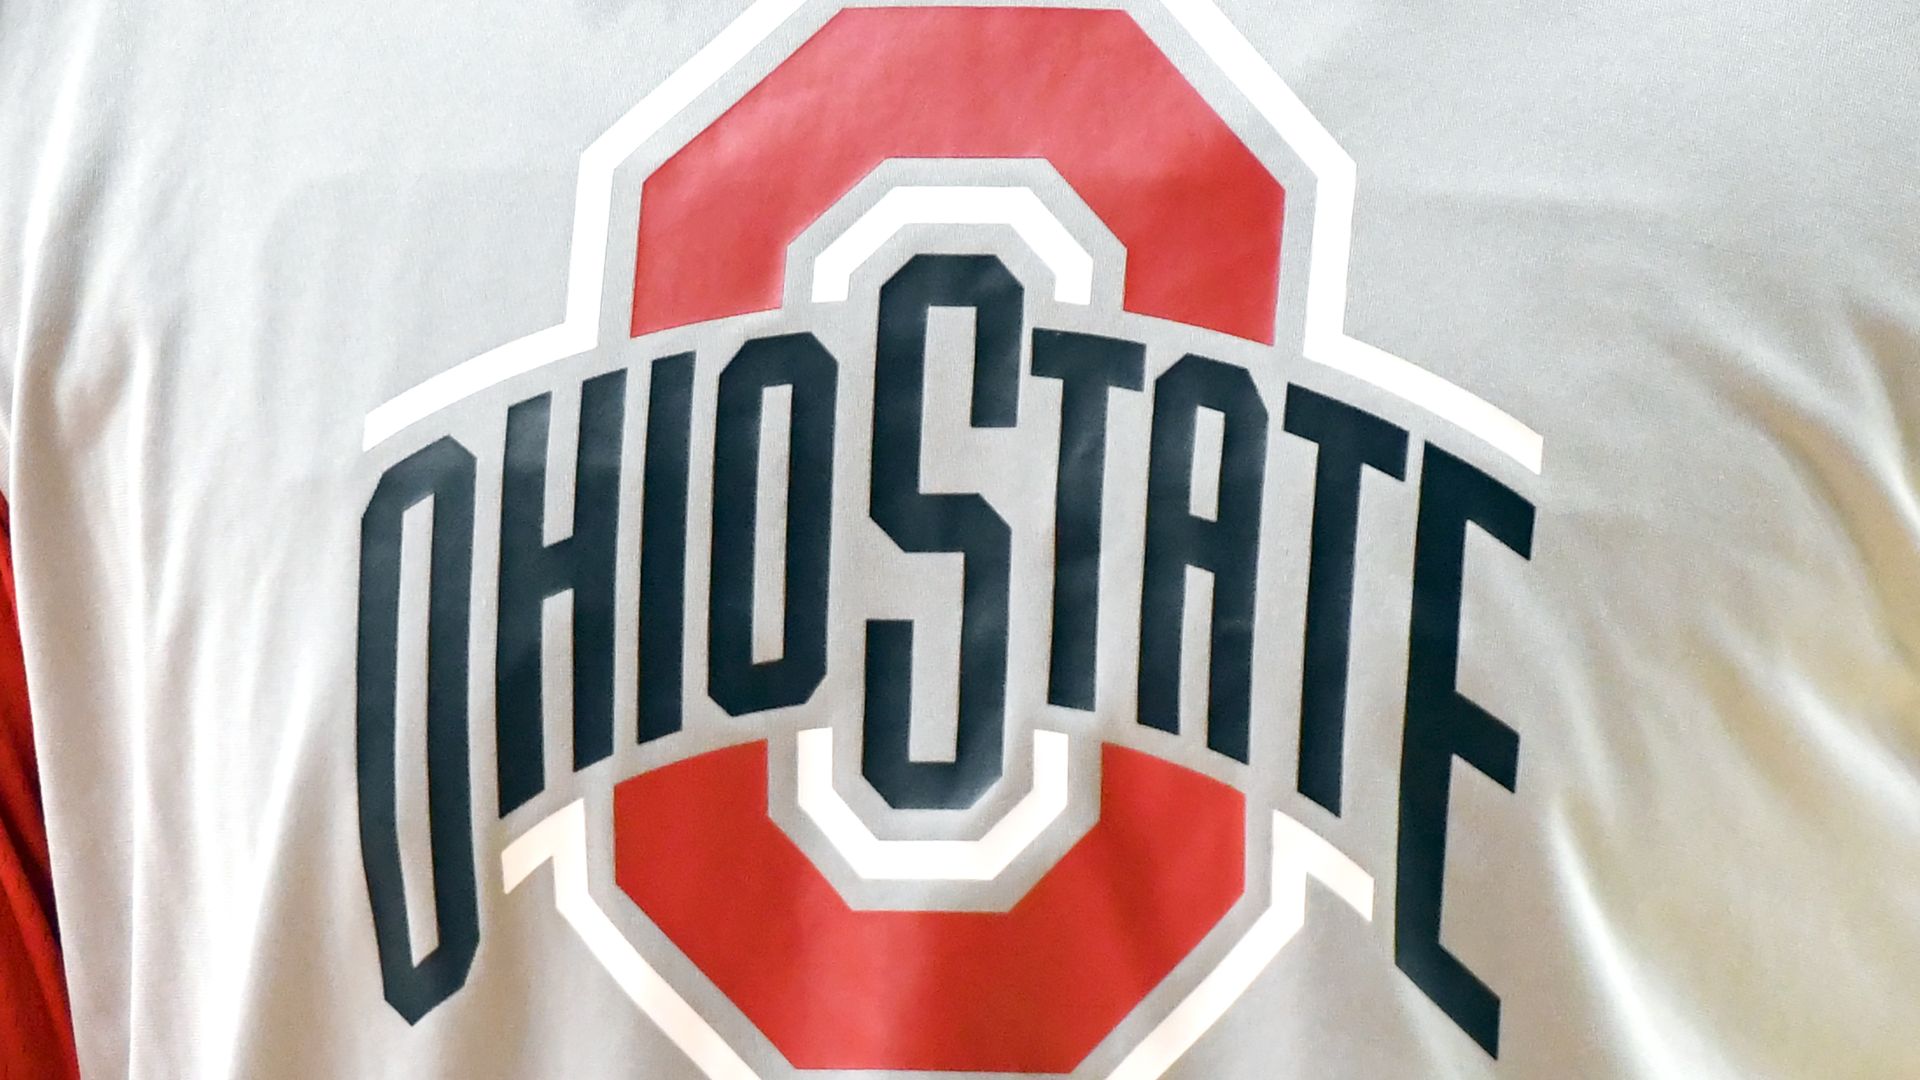 In this image, a T-Shirt displays the Ohio State logo.